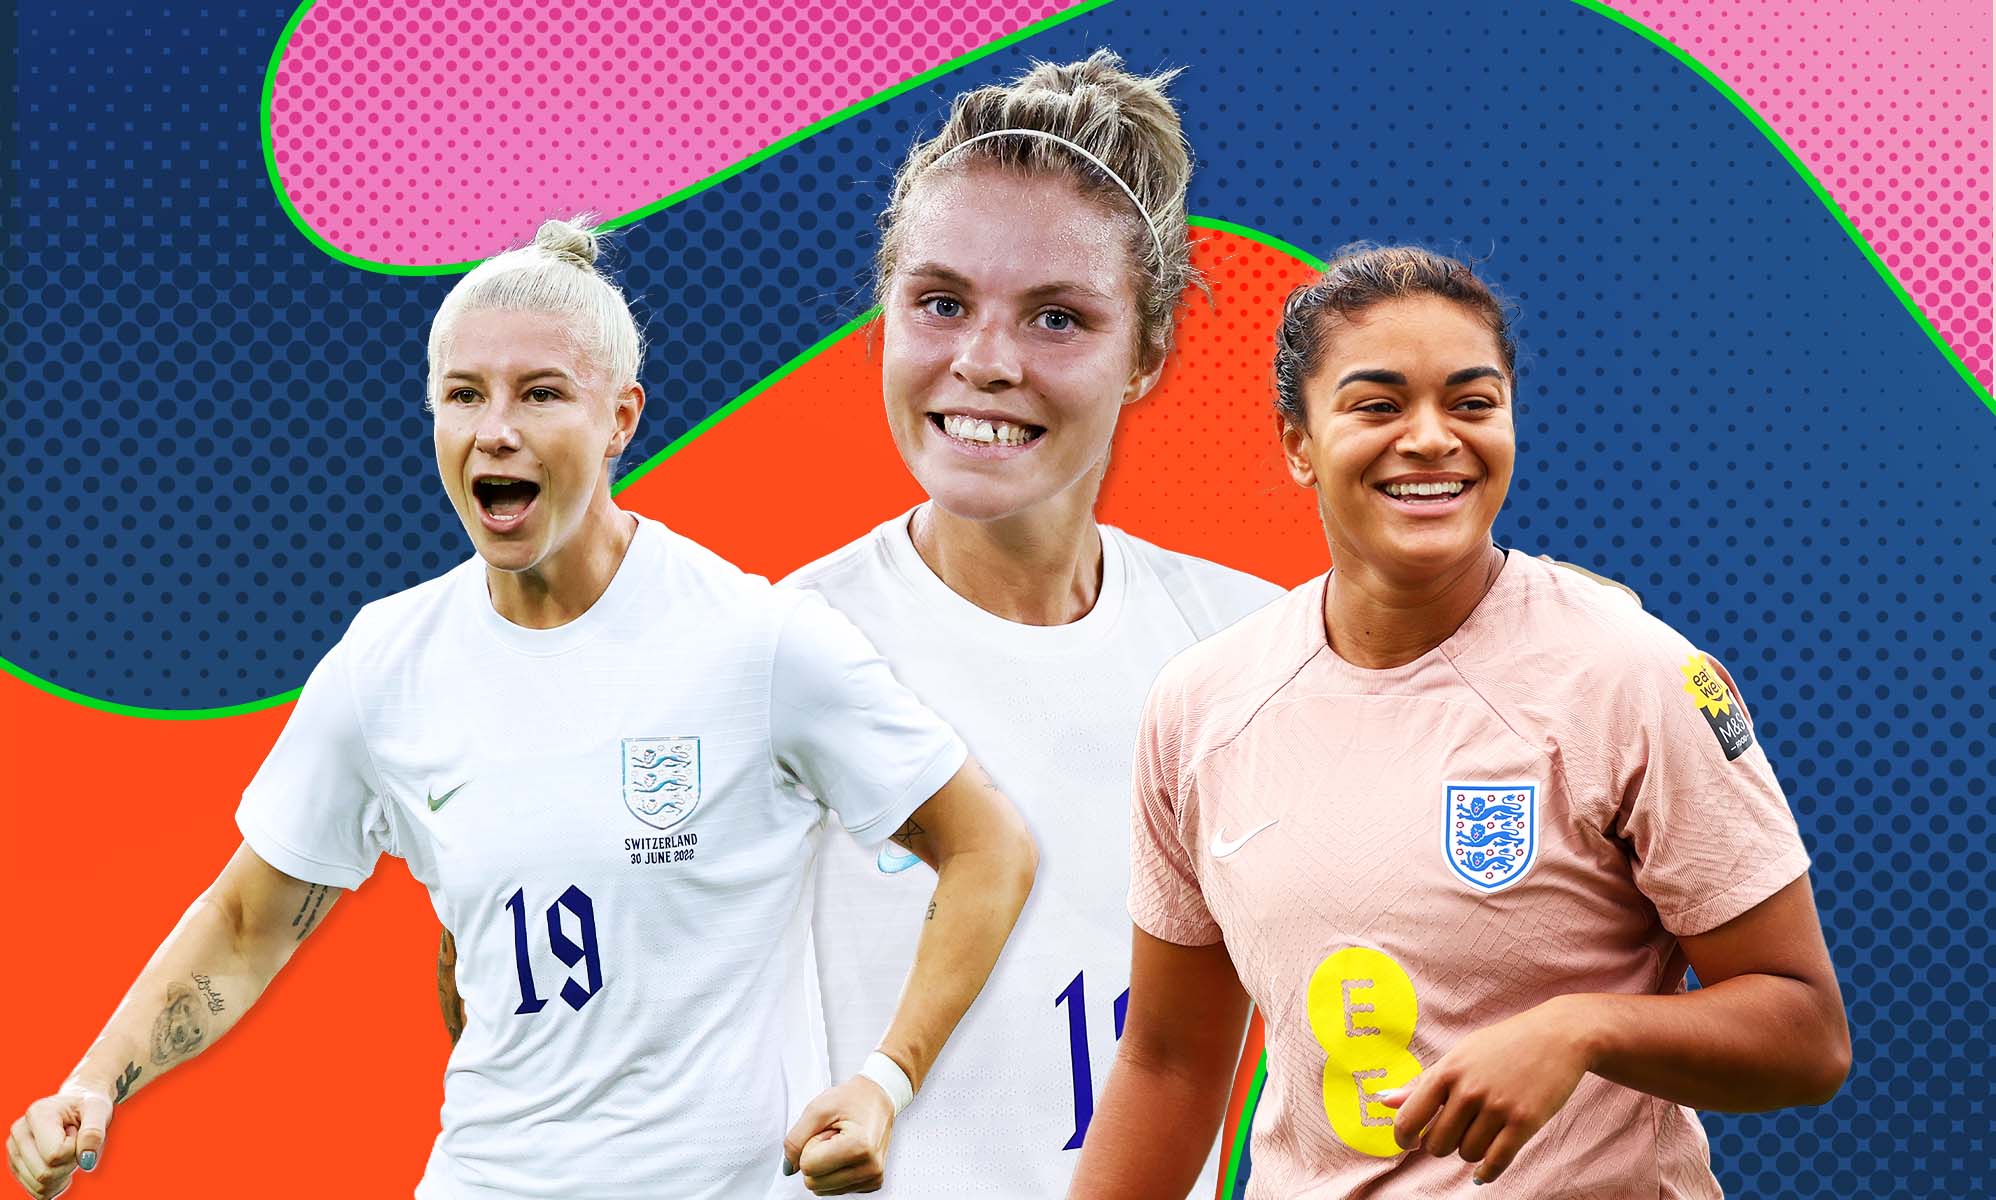 The LGBTQ England Lionesses in the Womens World Cup final